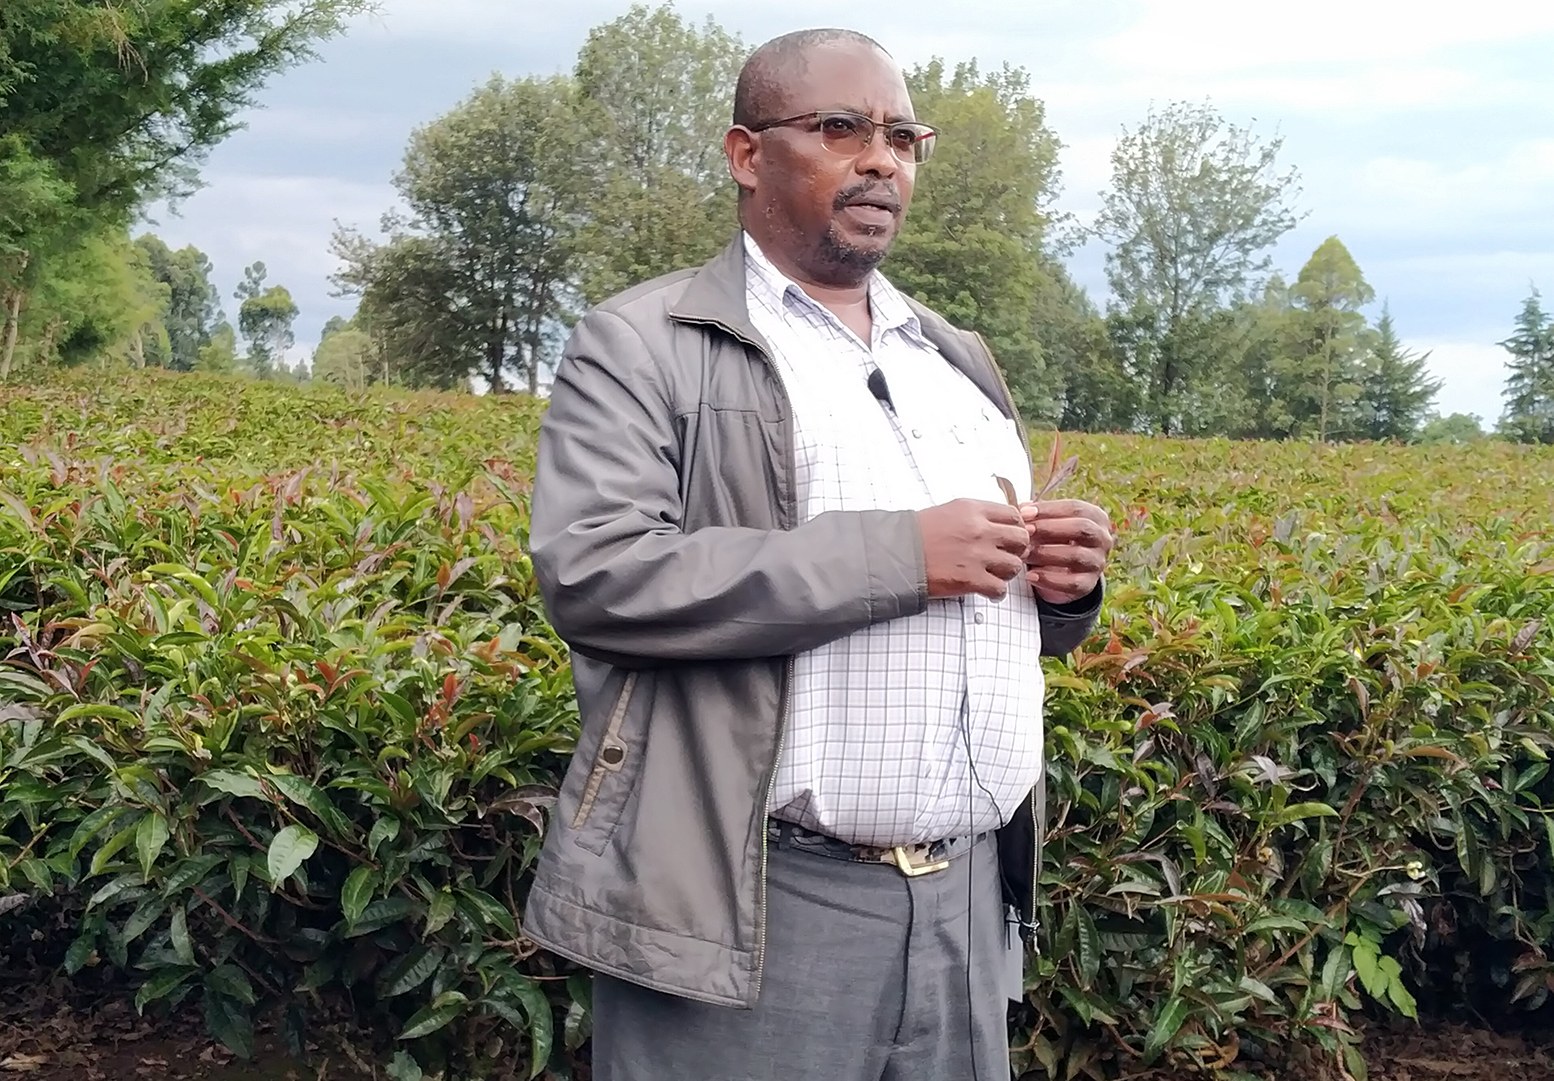 Untapped production of specialized teas can improve farmer’s earnings